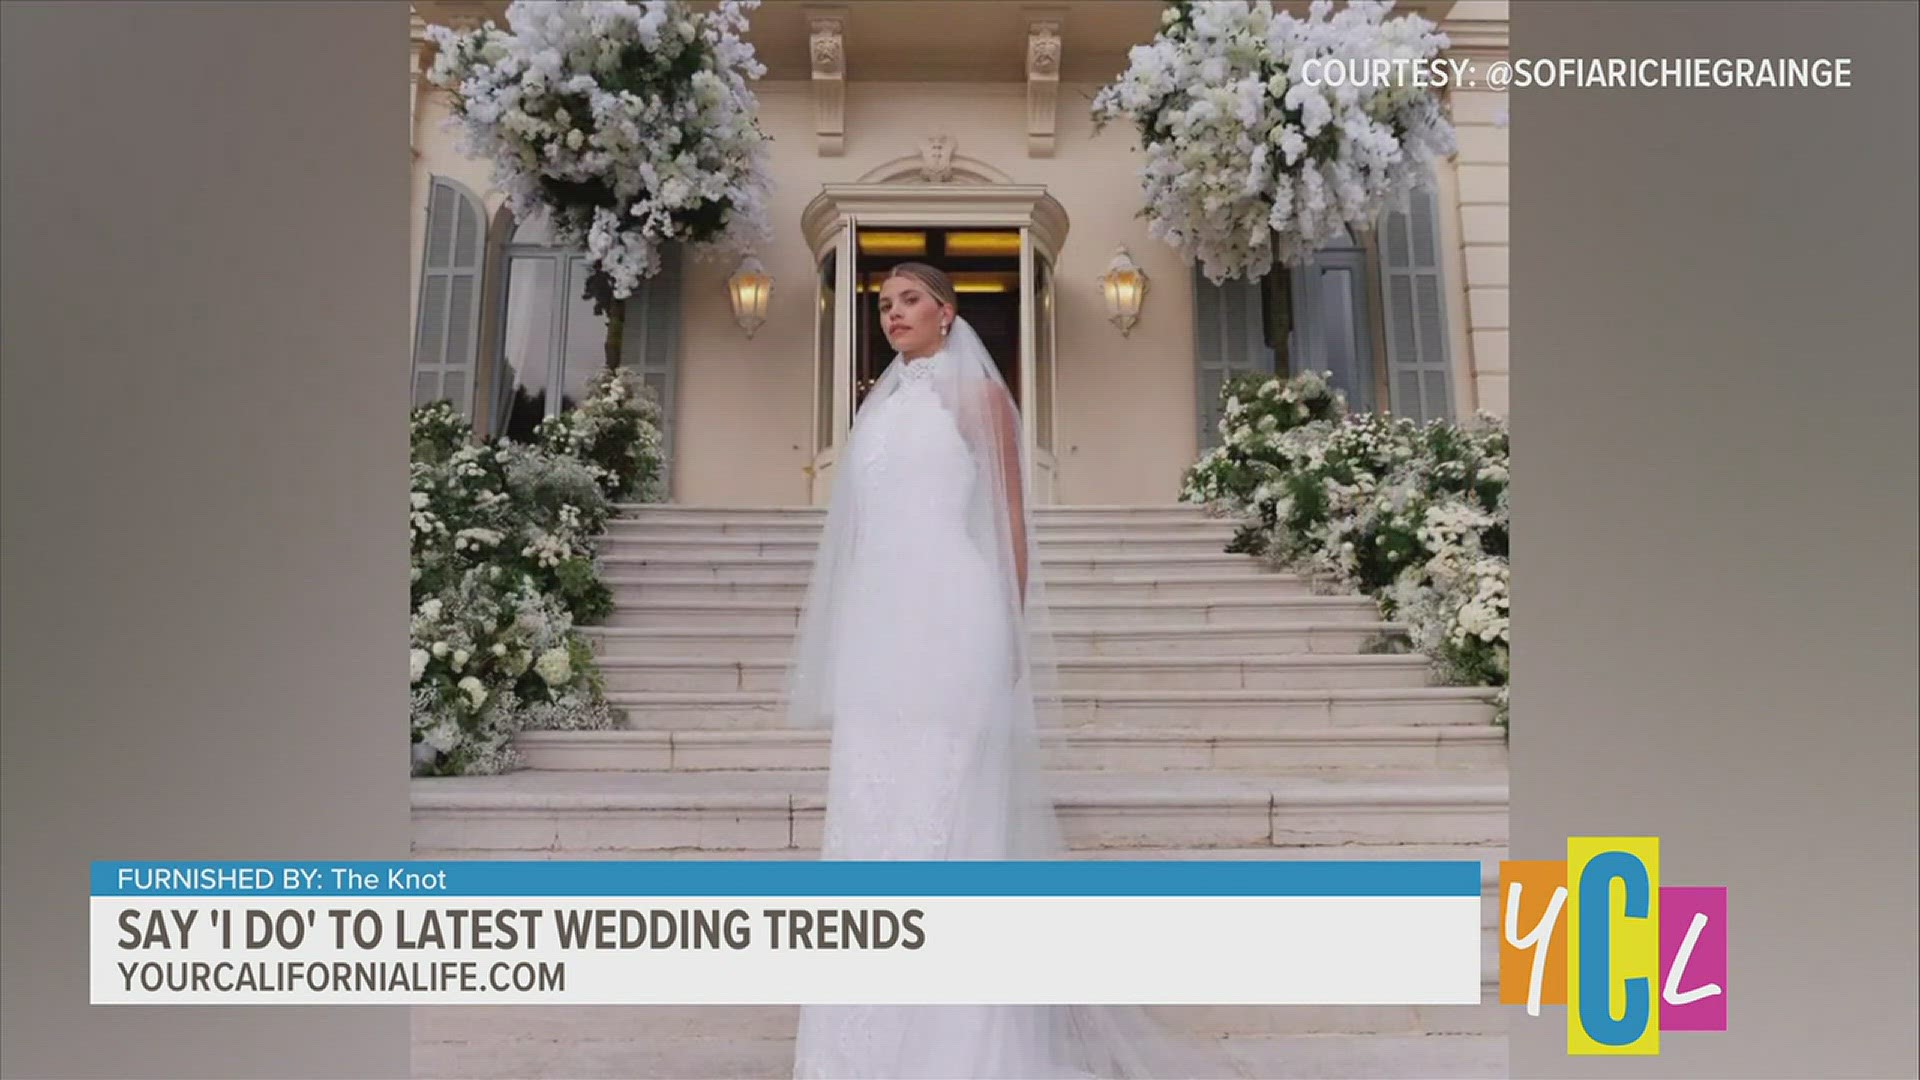 Check out the latest trends in the always-changing world of nuptials!